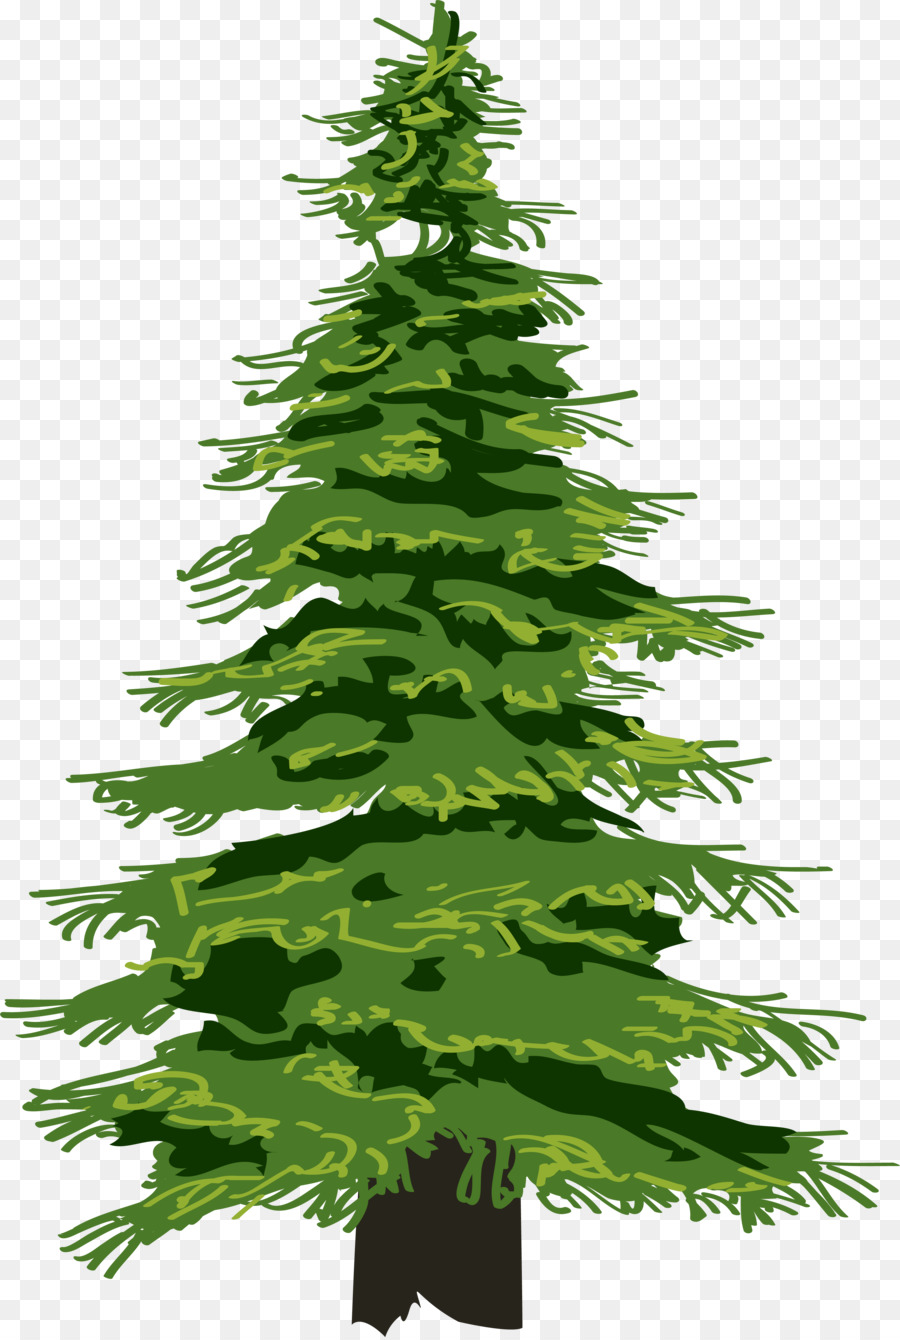 Pine Tree Evergreen Clip art - christmas tree png download - 3401*5054 - Free Transparent Pine png Download.